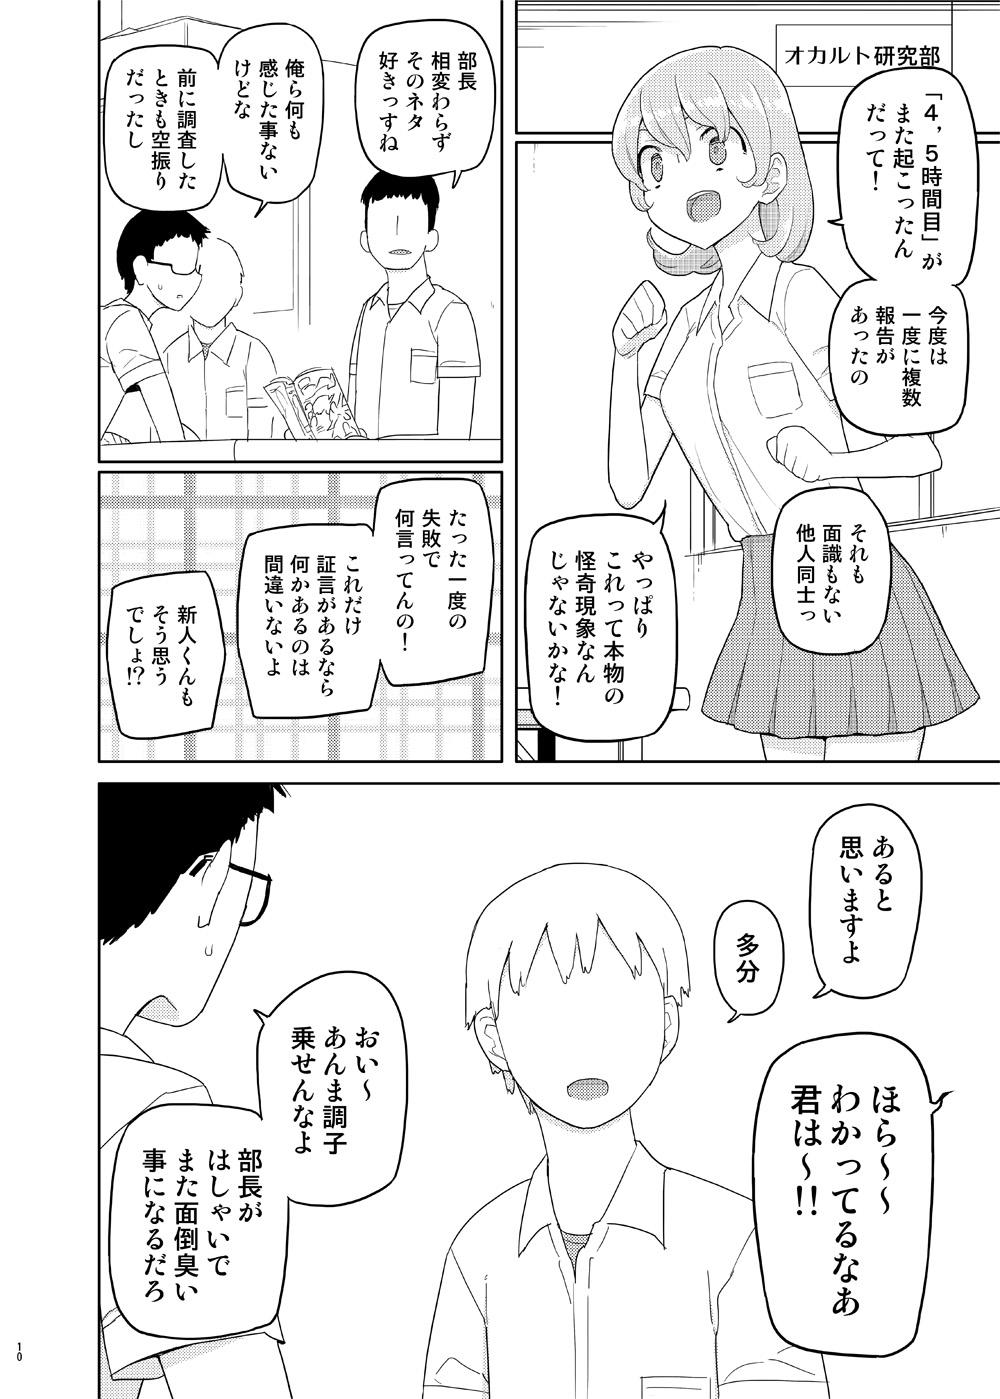 Sesso 4, 5 Jikanme - Original Relax - Page 9